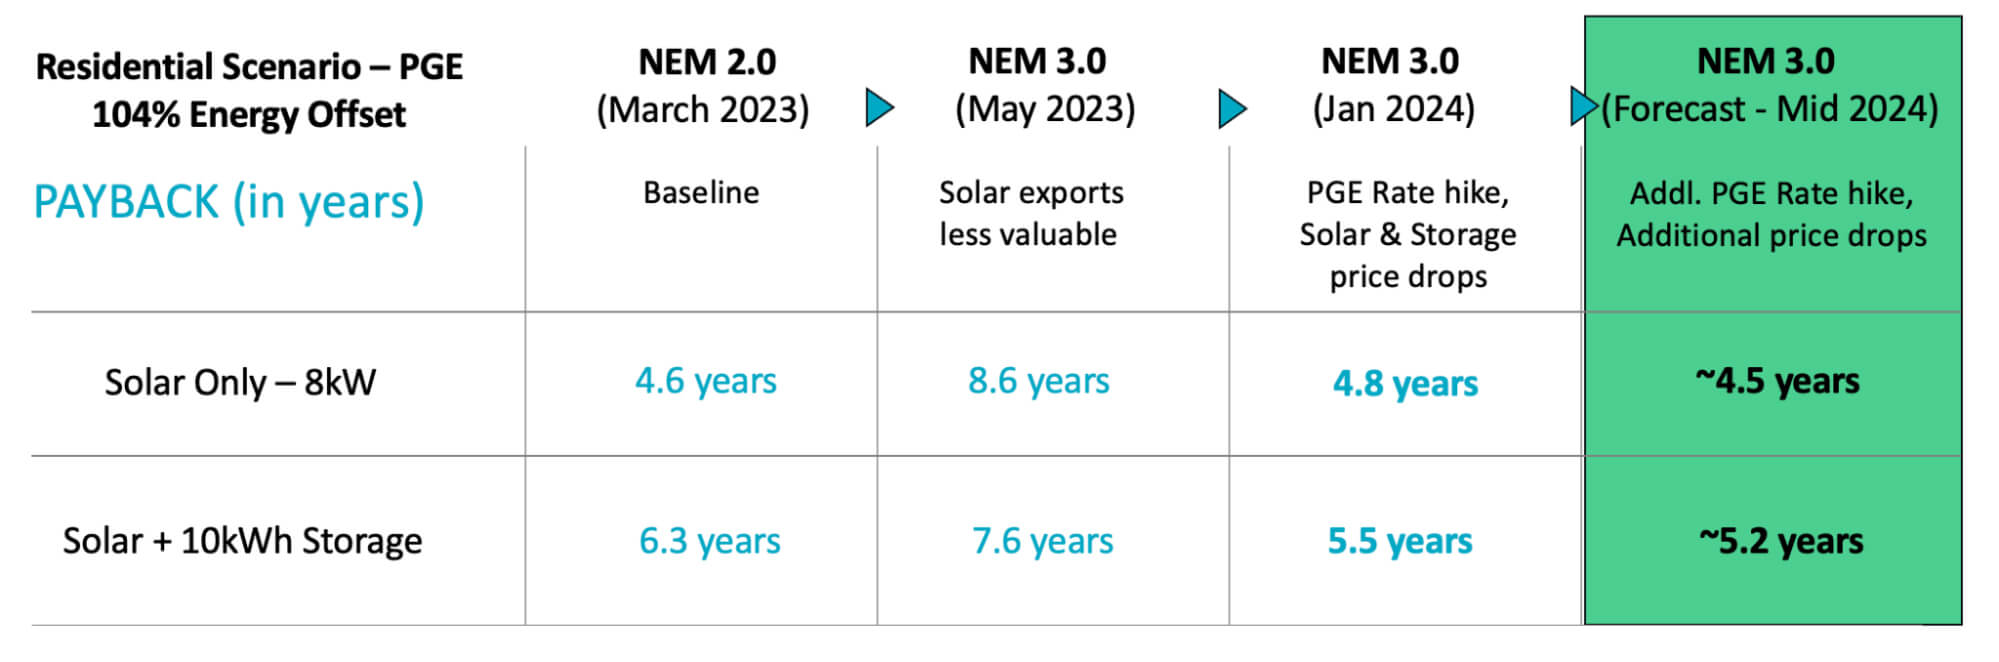 Research table from Enact Solar displaying payback period for solar panel and battery storage systems under NEM 3.0 and NEM 2.0.